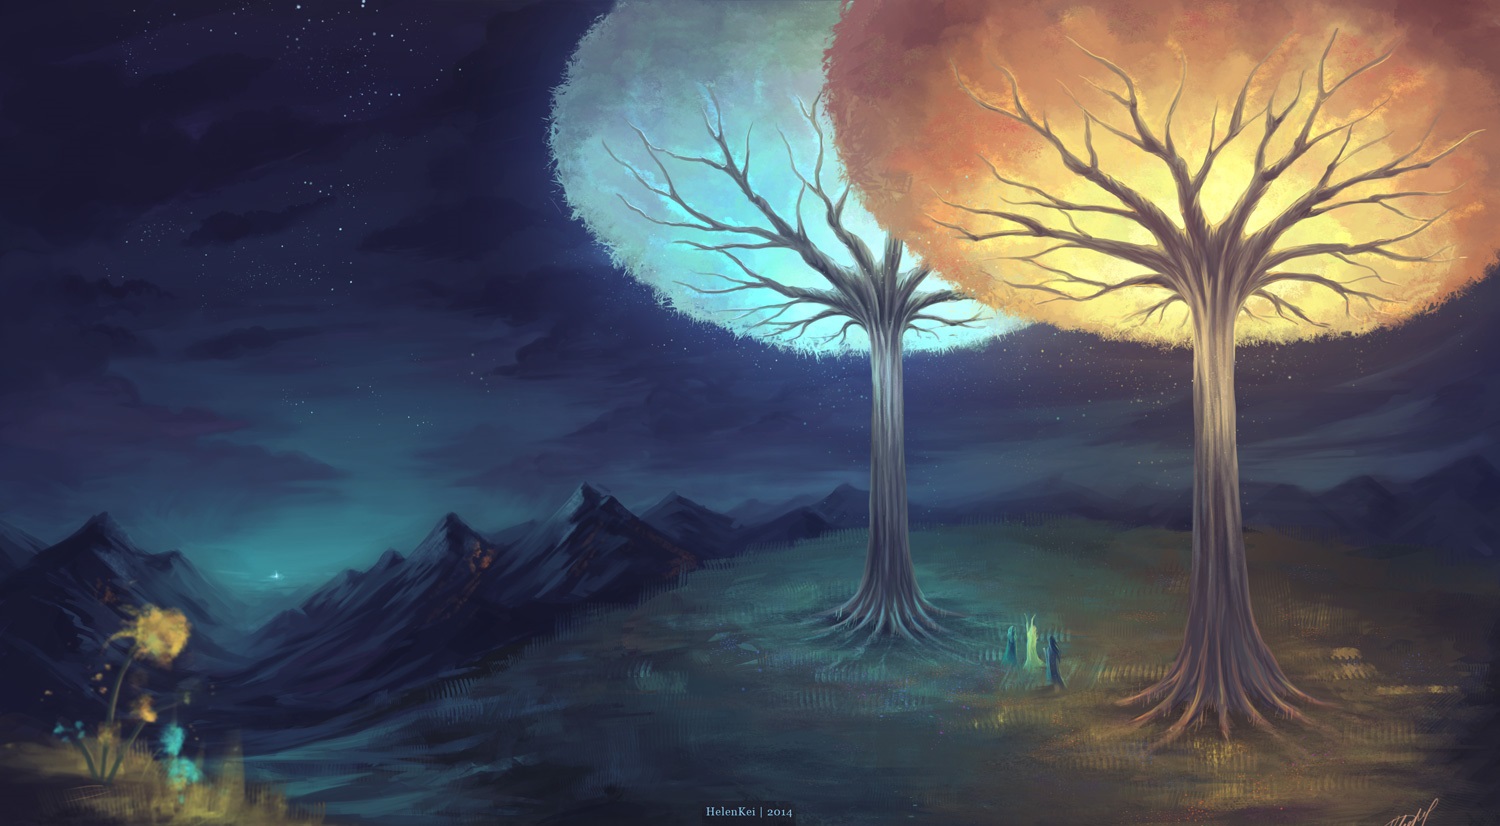 The Two Trees of Valinor in The Lord of the Rings. Art by HelenKei